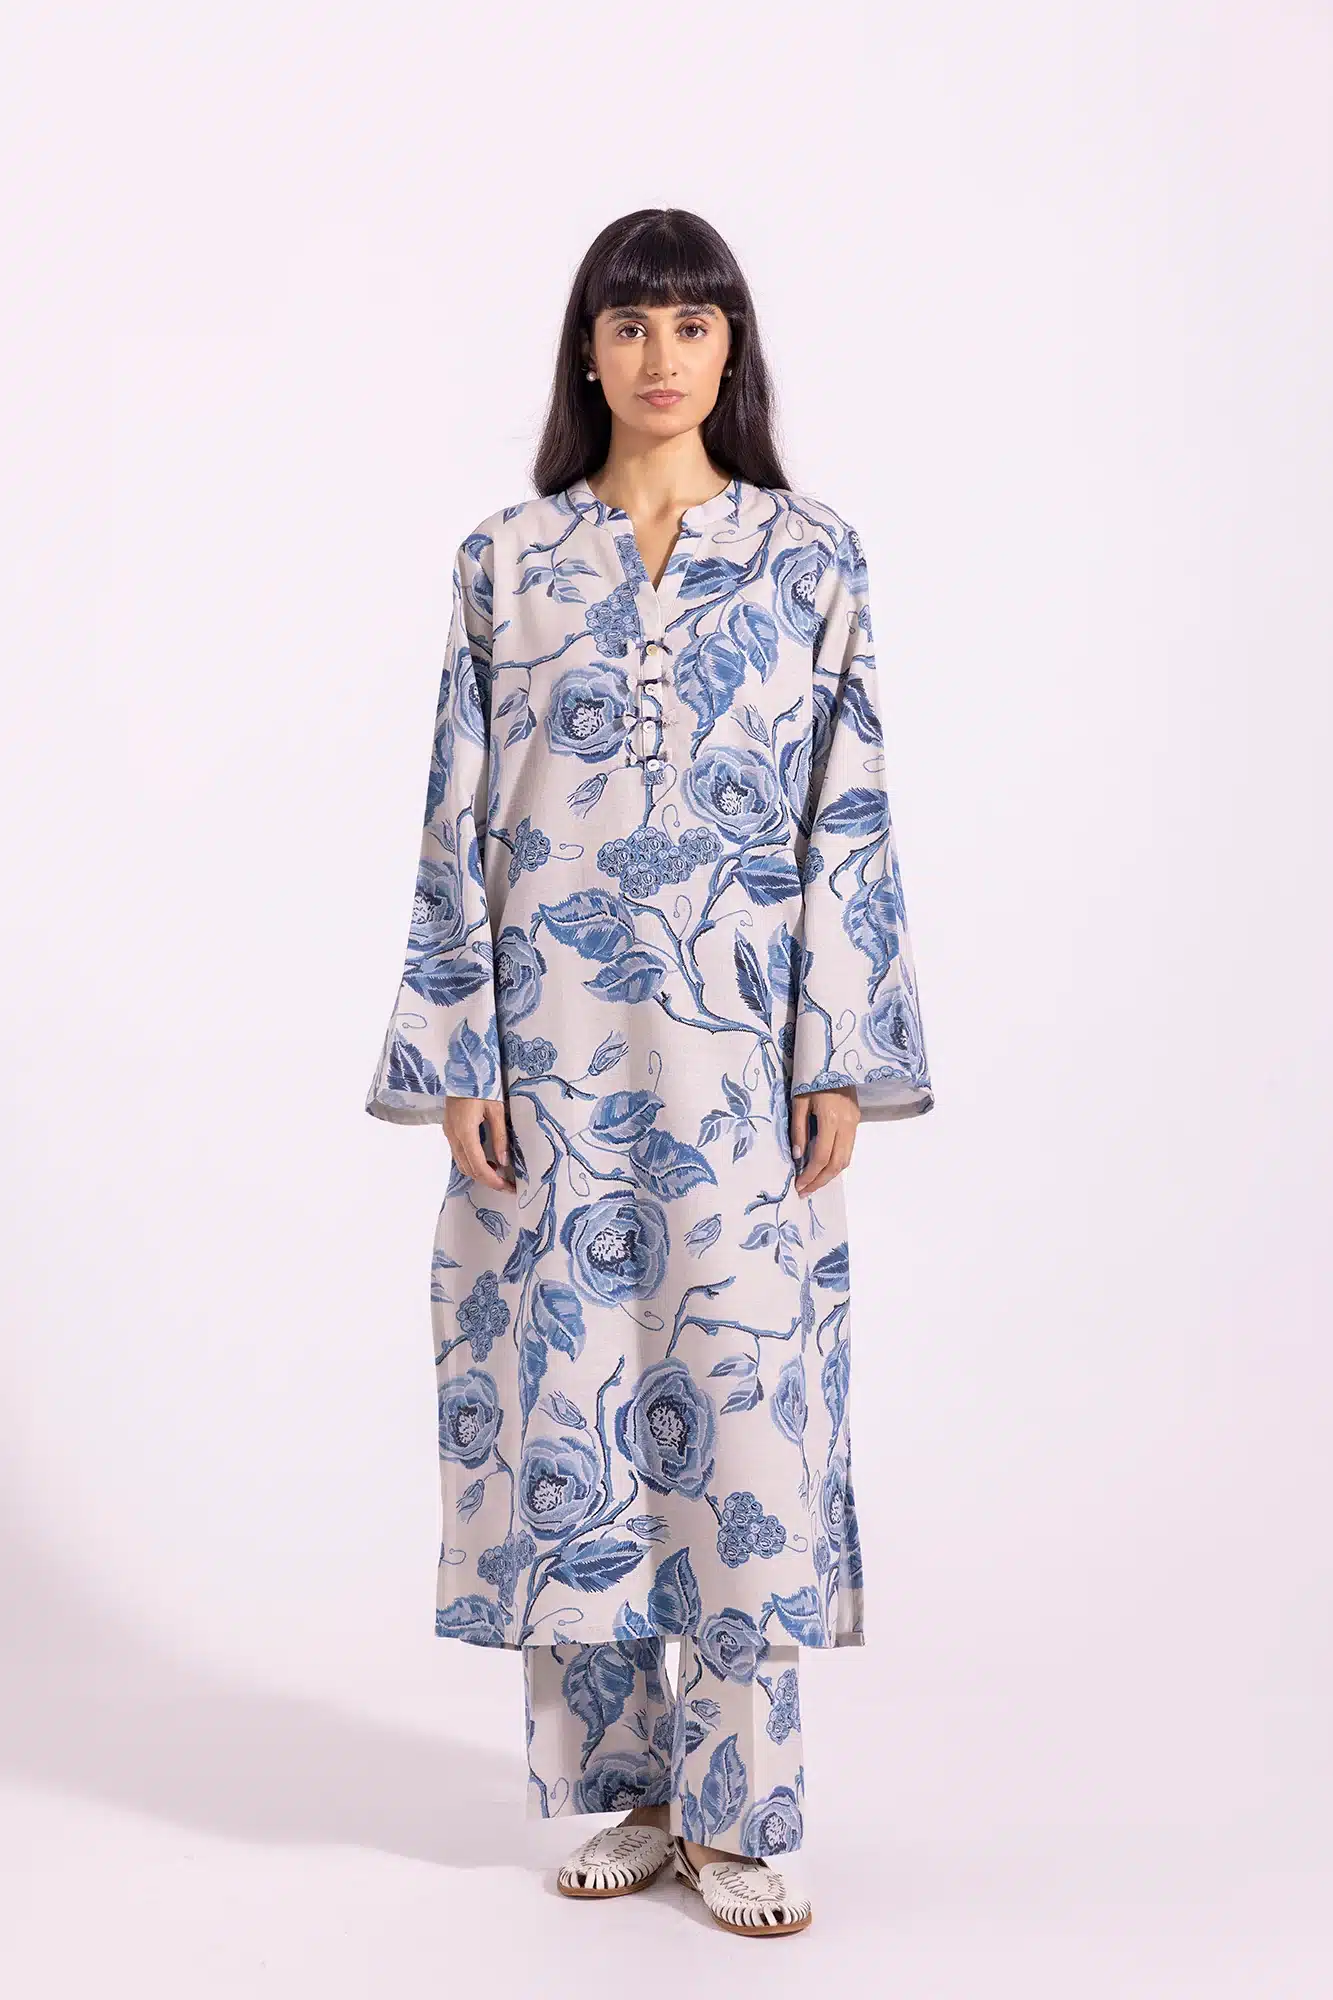 PRINTED SUIT Blue and white color